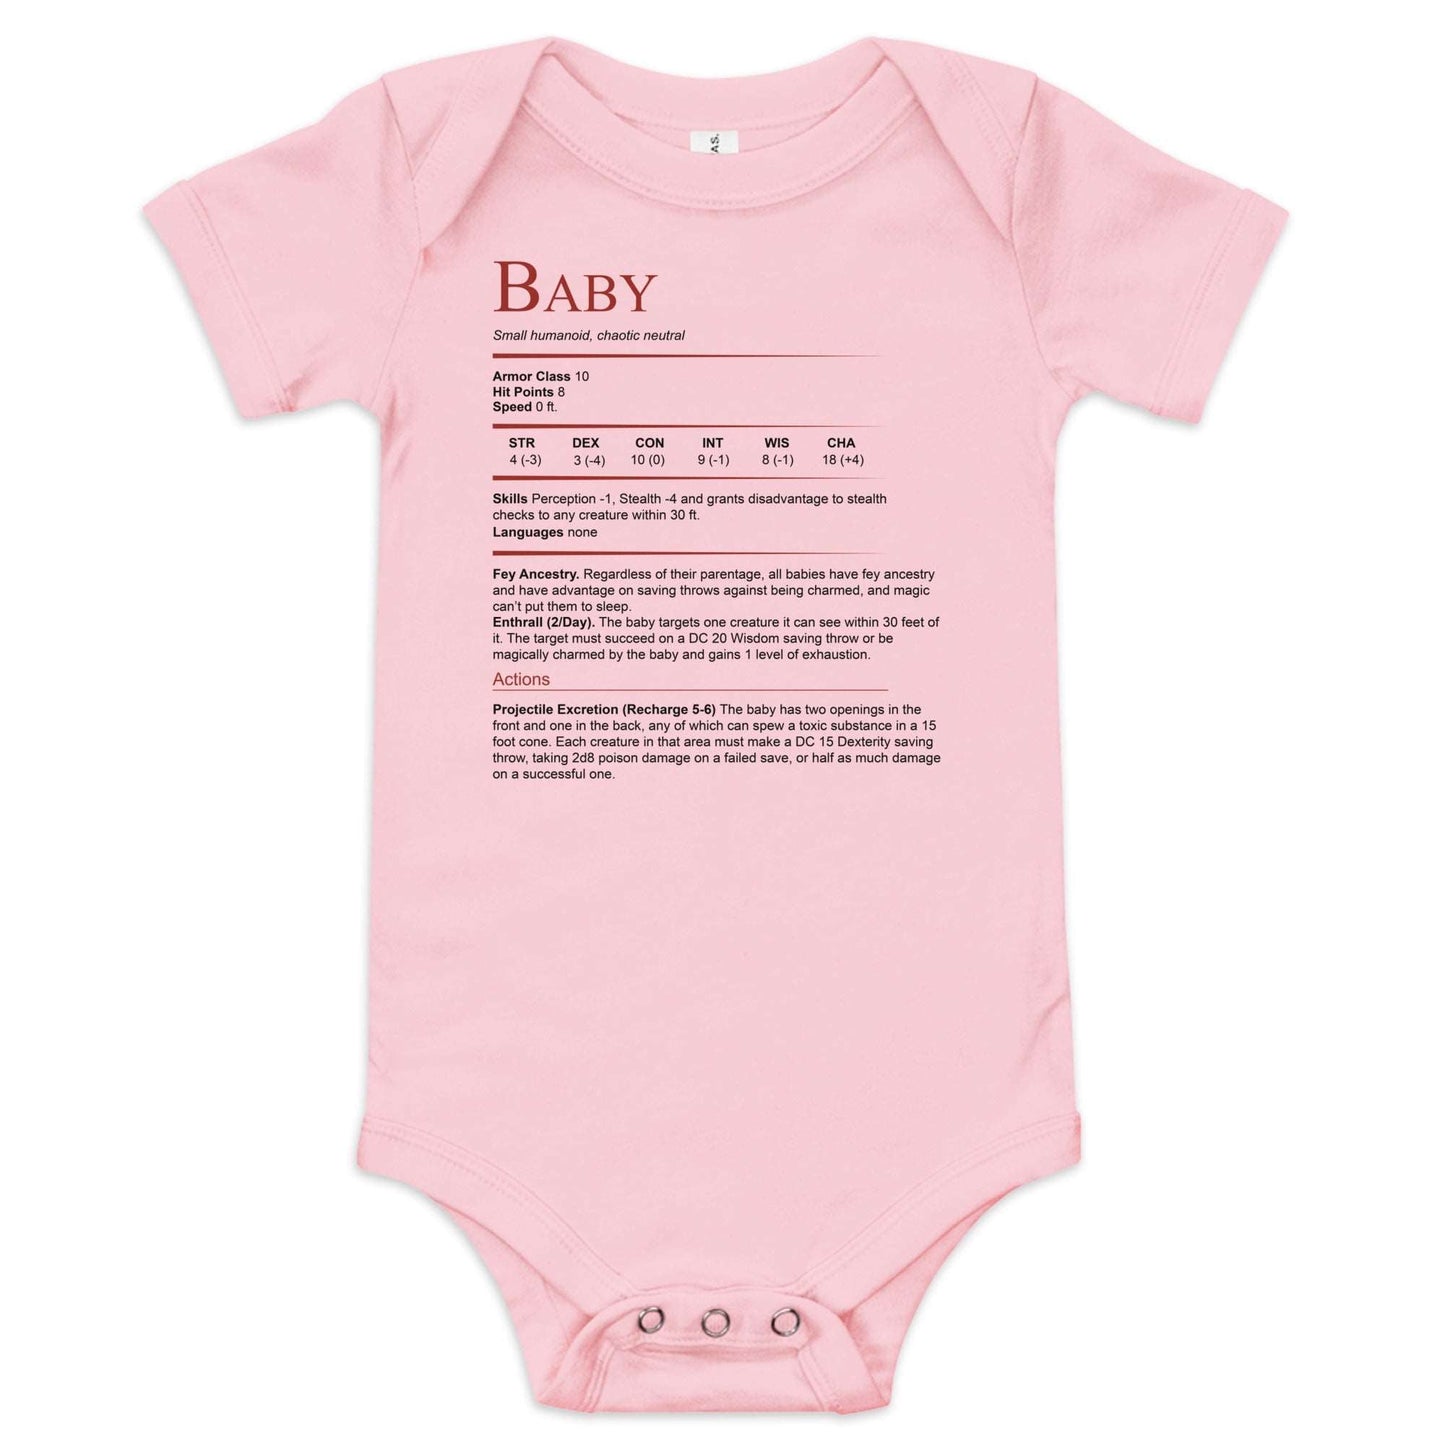 DnD Baby Stat Block Bodysuit – Funny Dungeons & Dragons Gift for New Parents Baby Bodysuit Pink / 3-6m